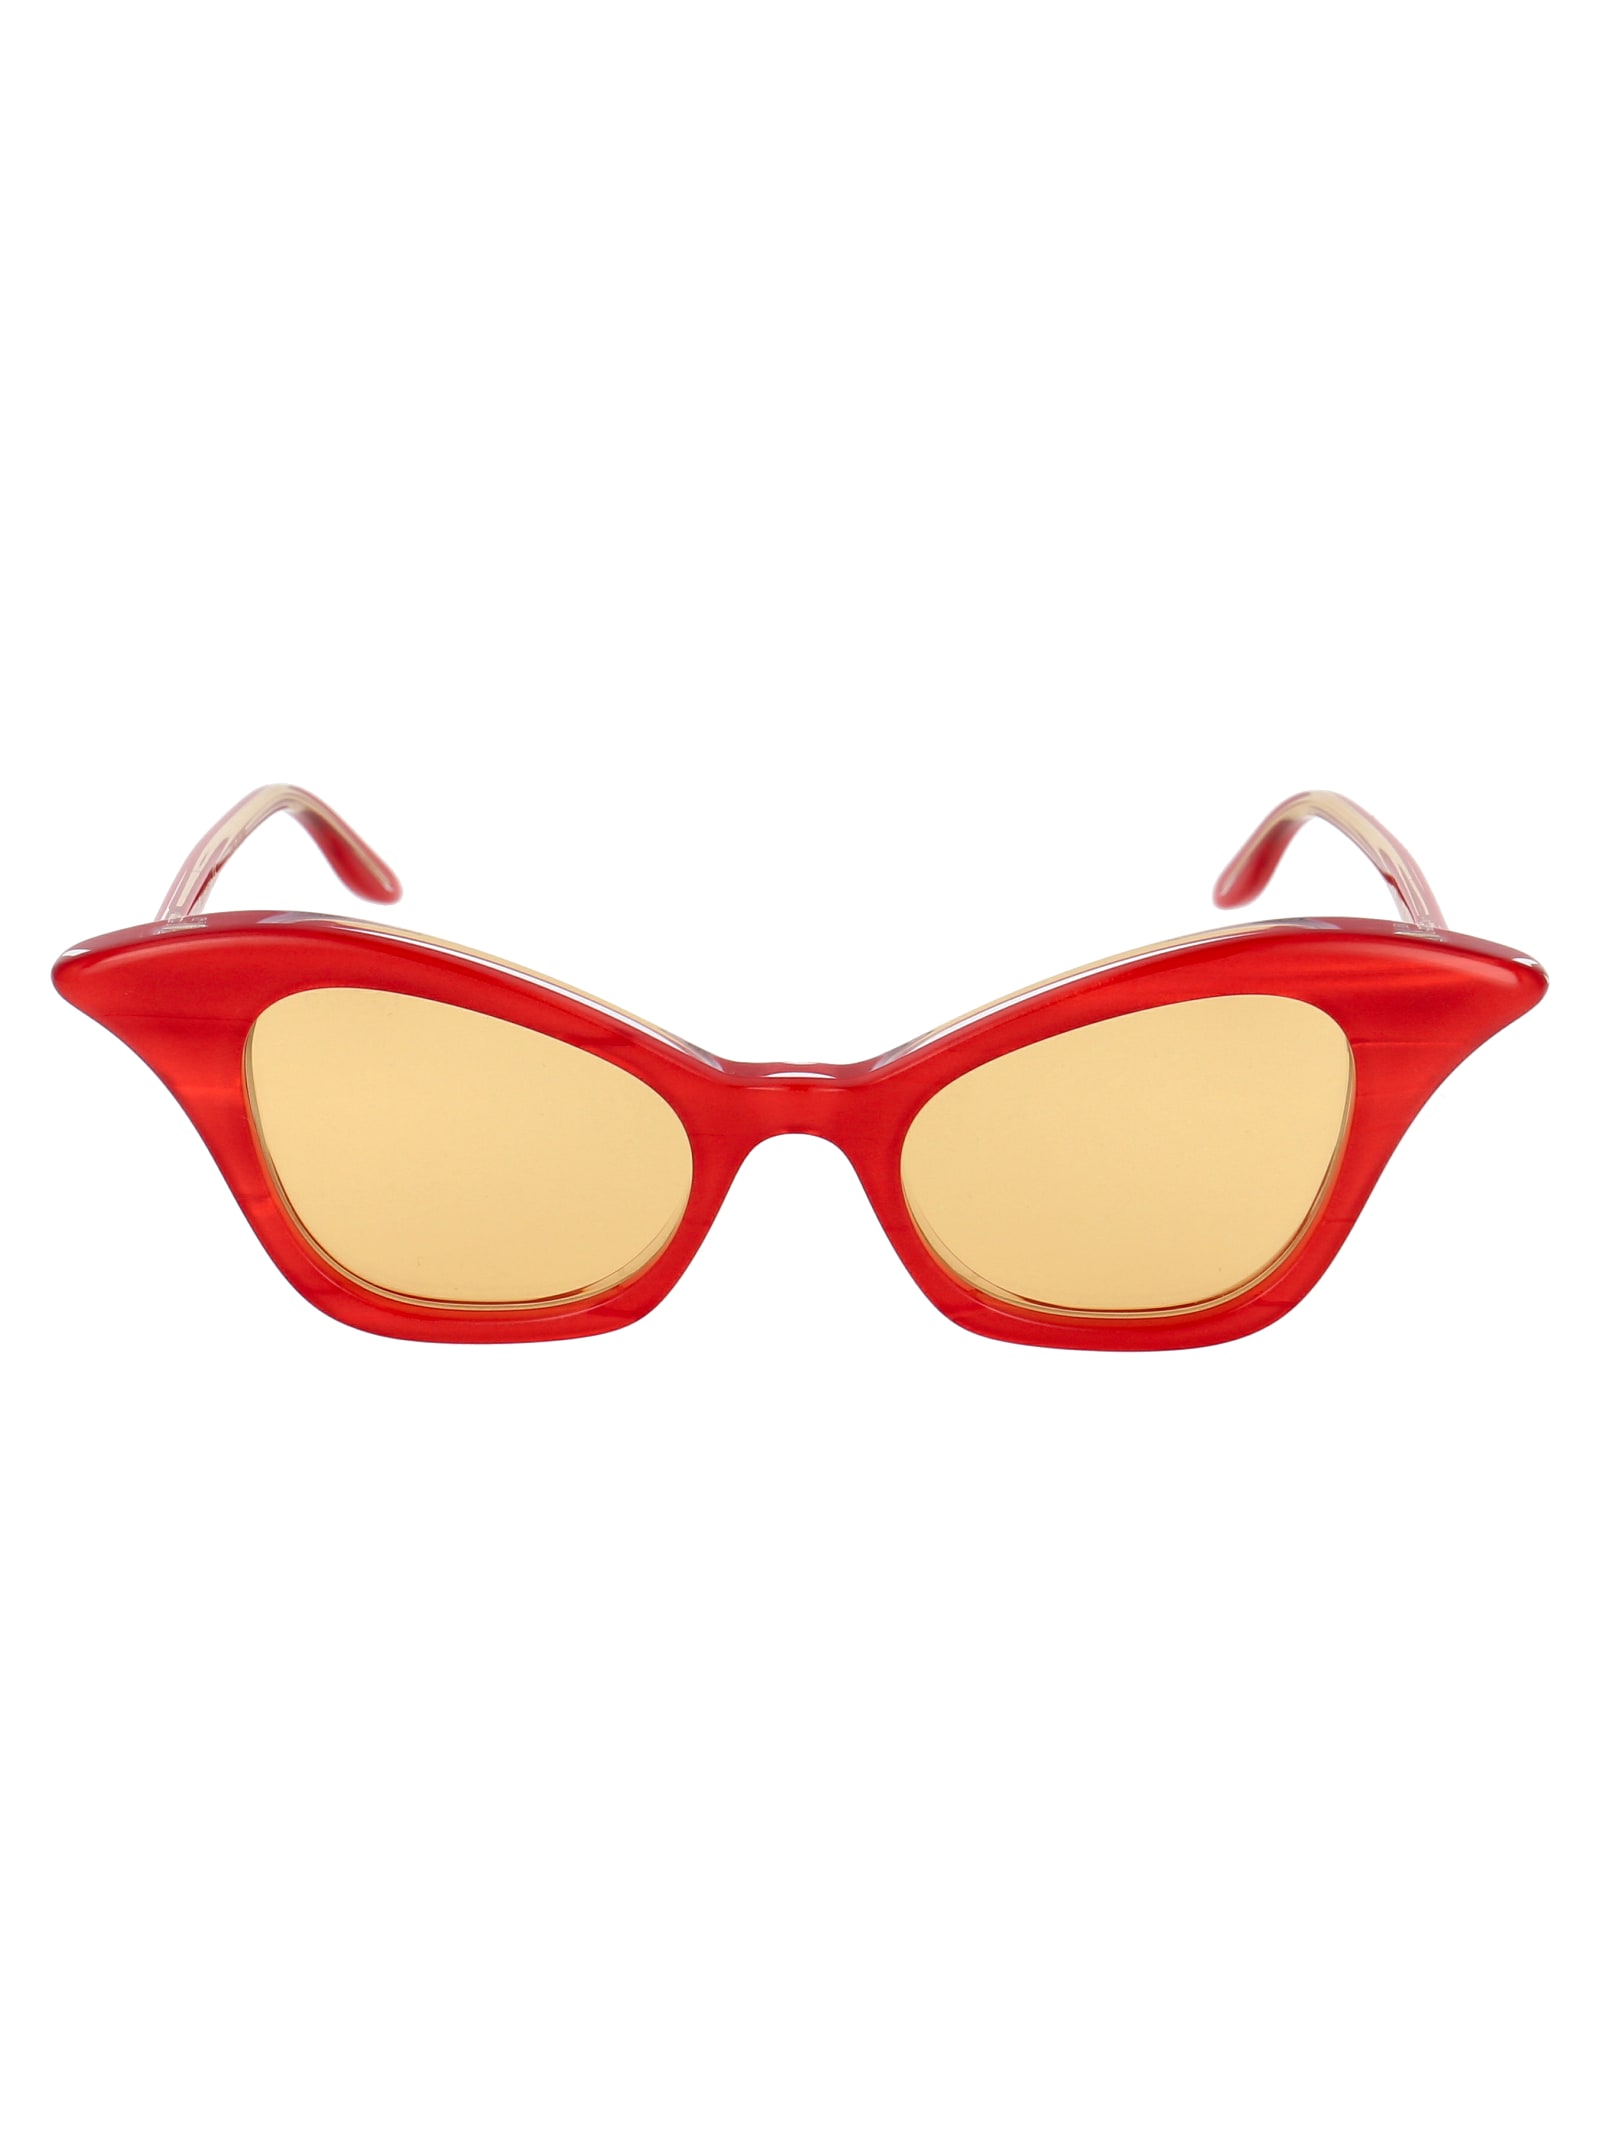 Gucci Sunglasses In Red Red Yellow